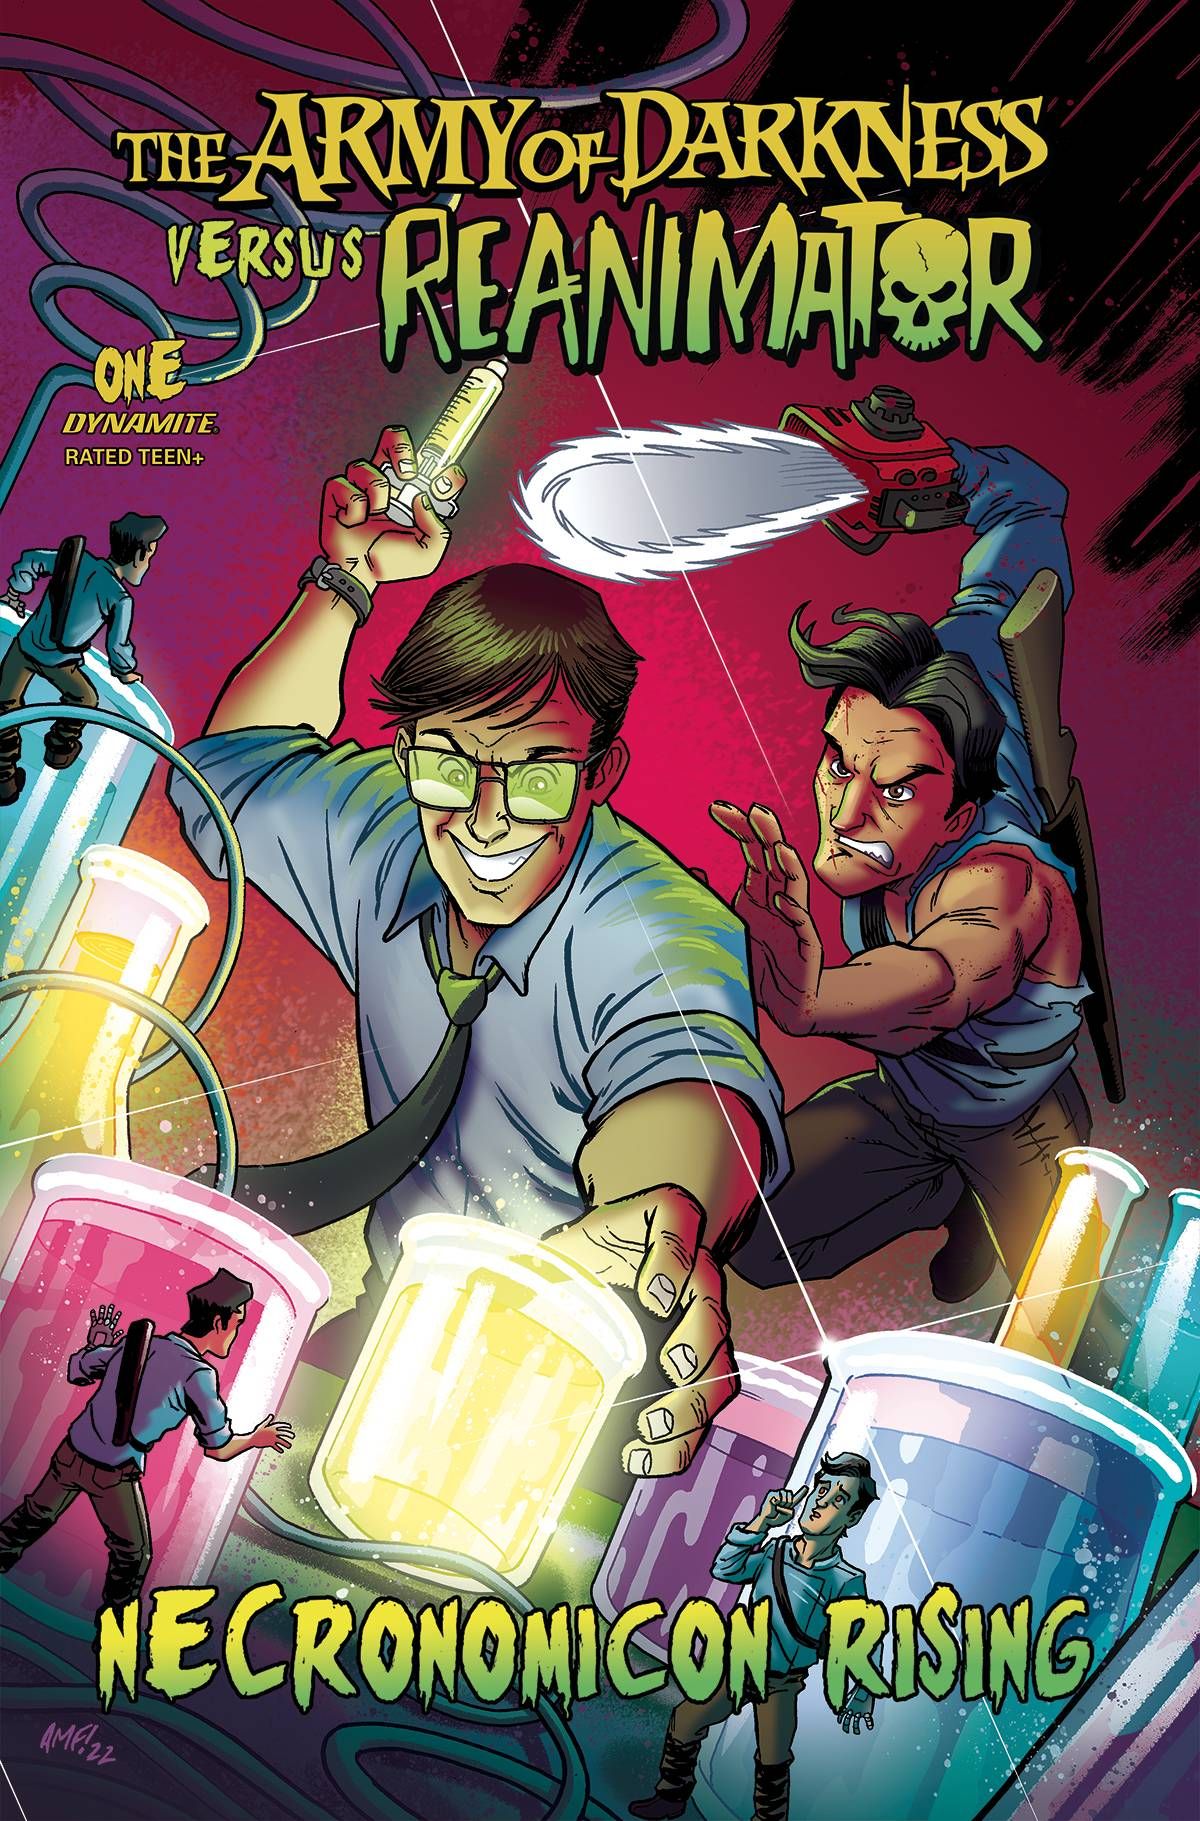 The Army of Darkness vs Reanimator #1 cover